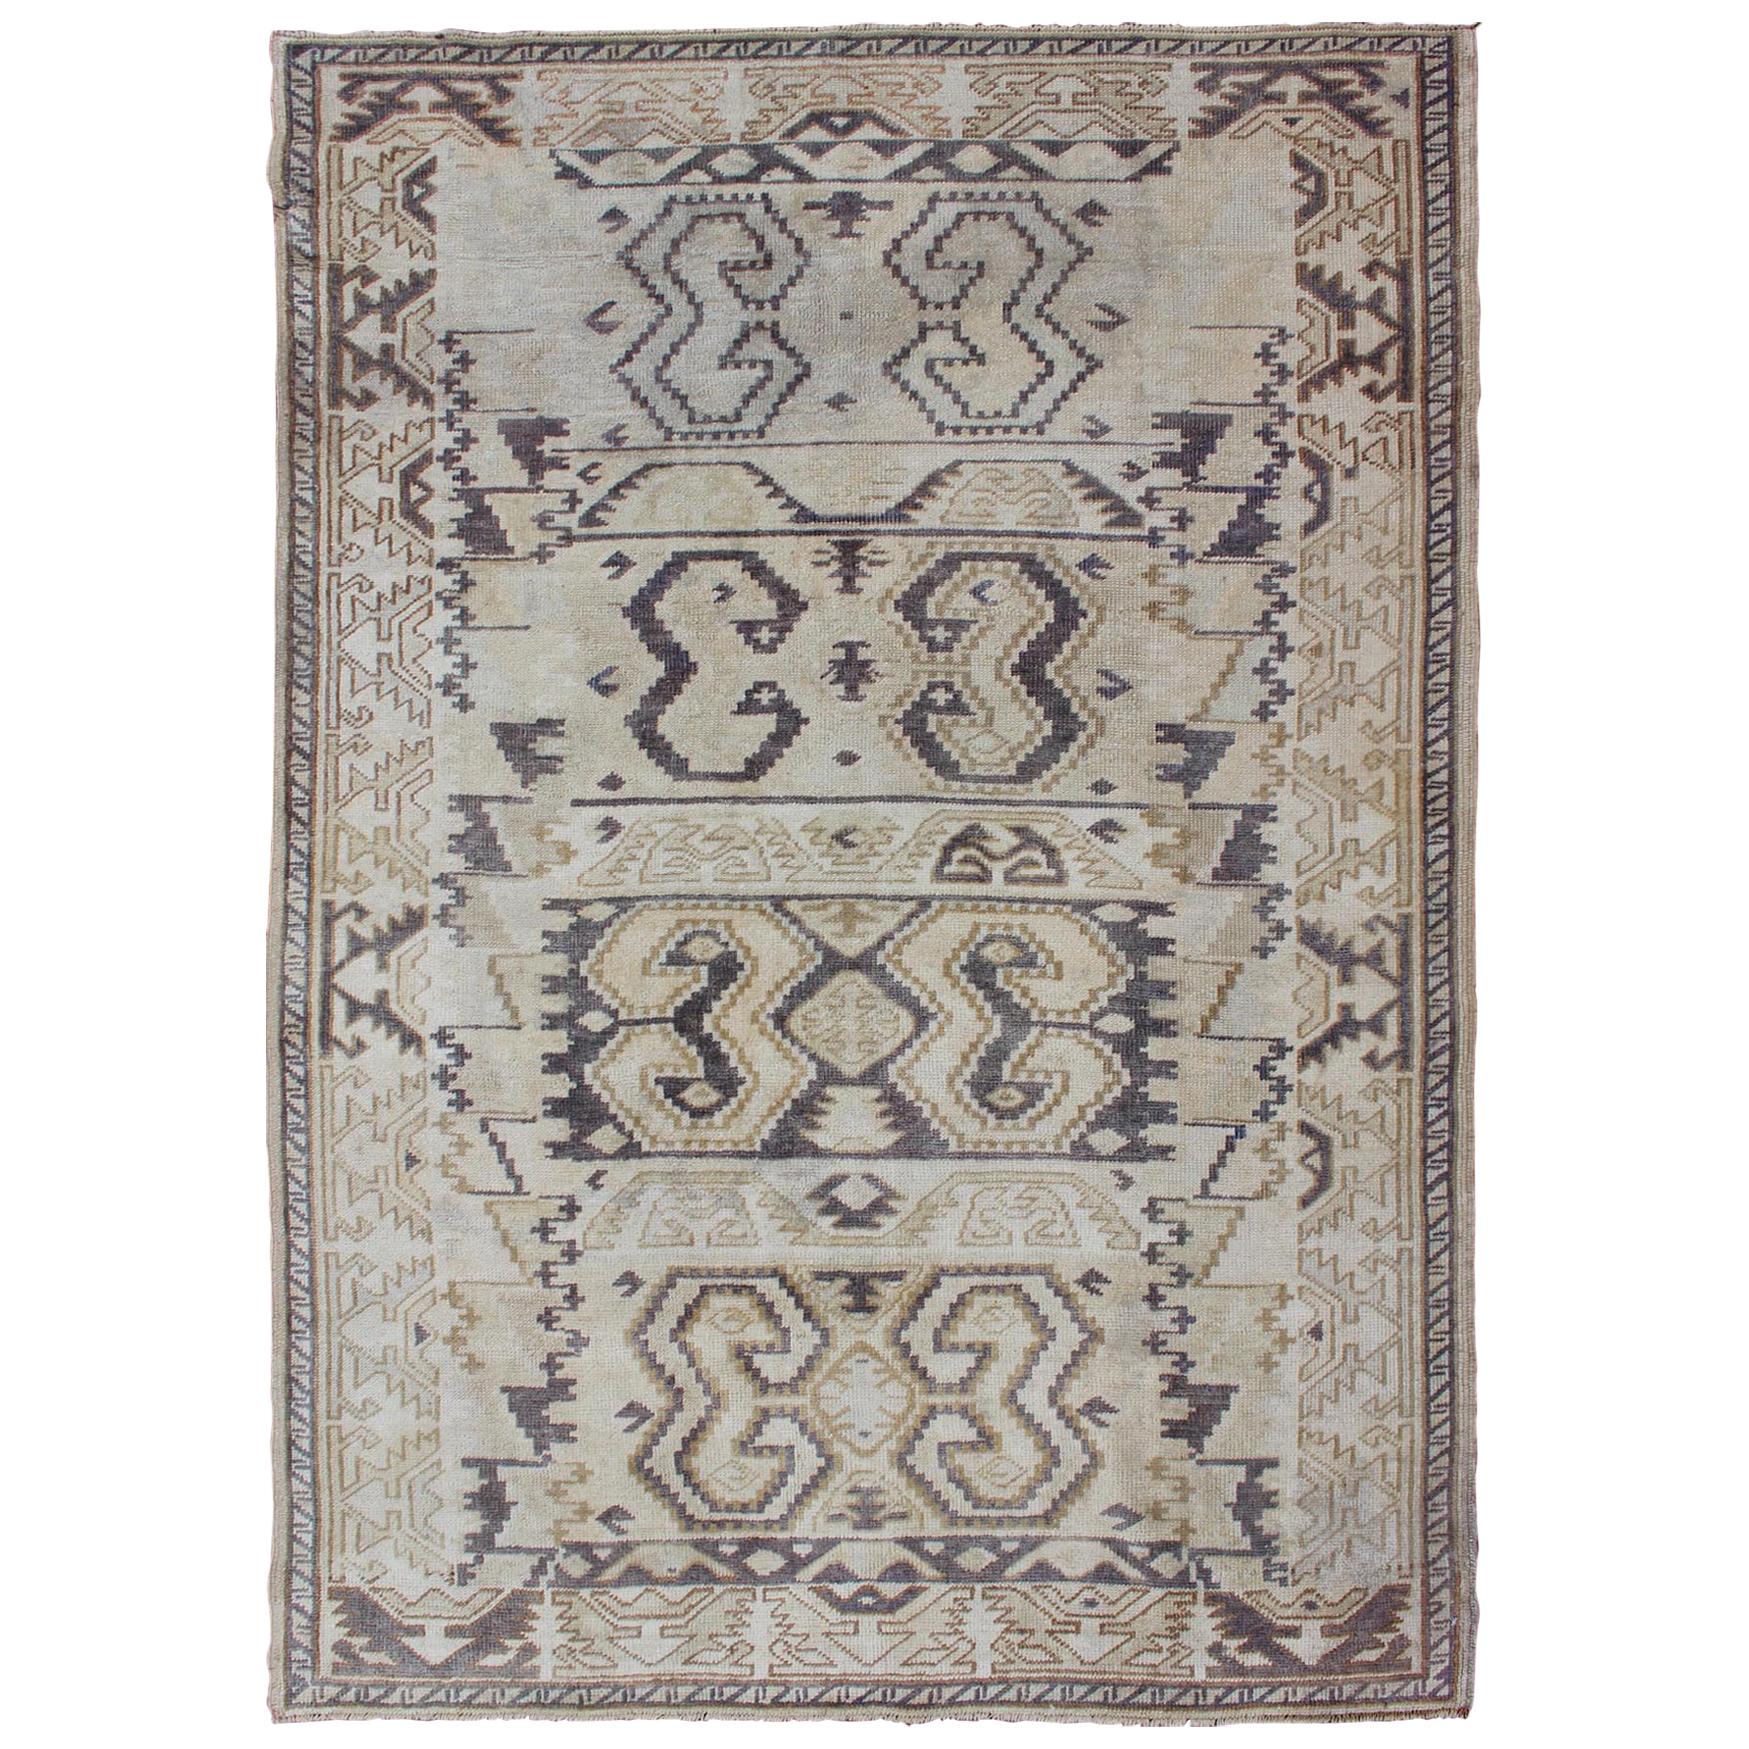 Uniquely Designed Oushak Rug in Taupe and Purple-Gray